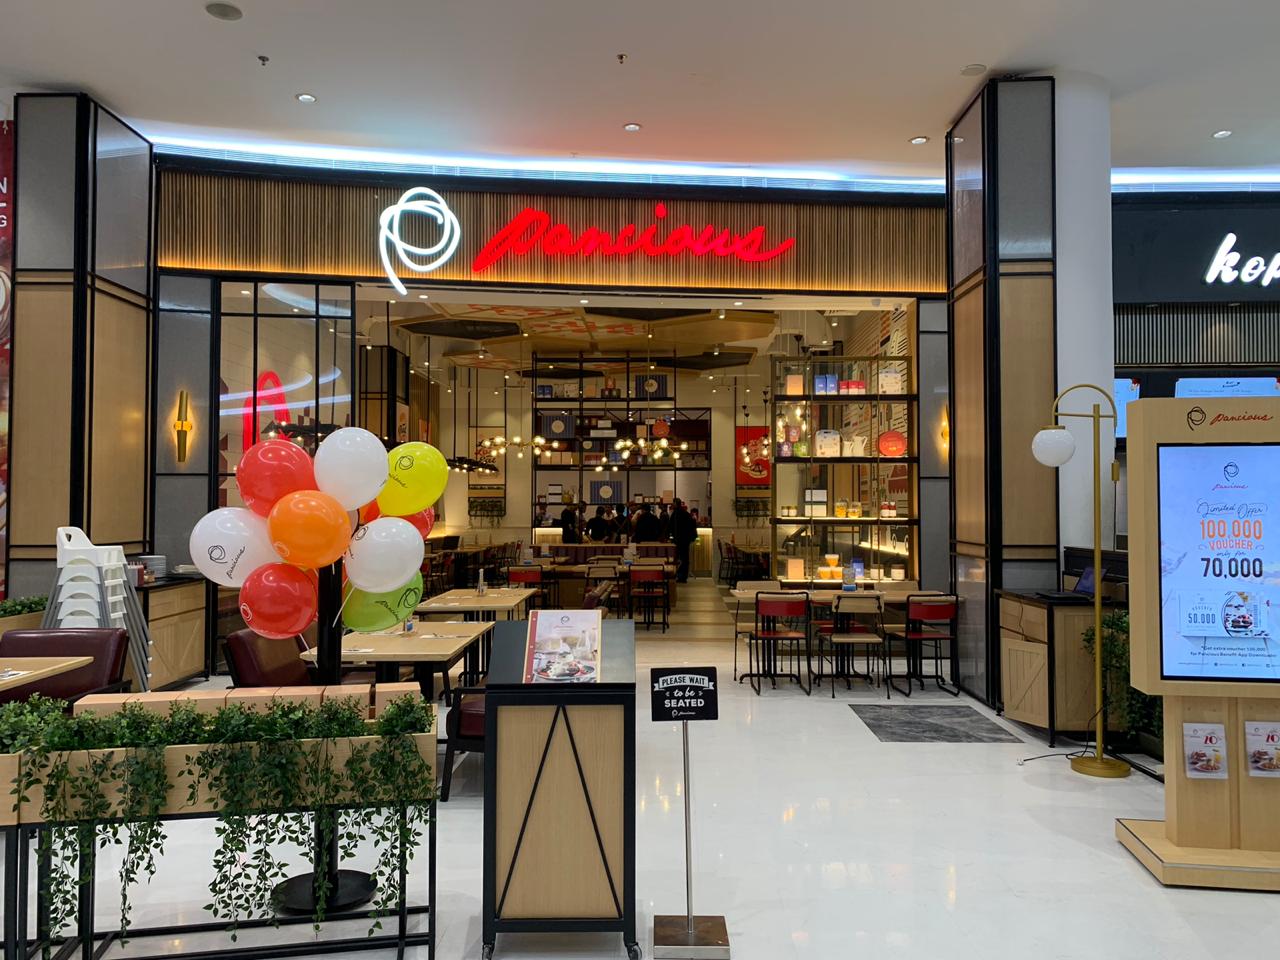 Pancious shop front in lippo mall puri st. moritz